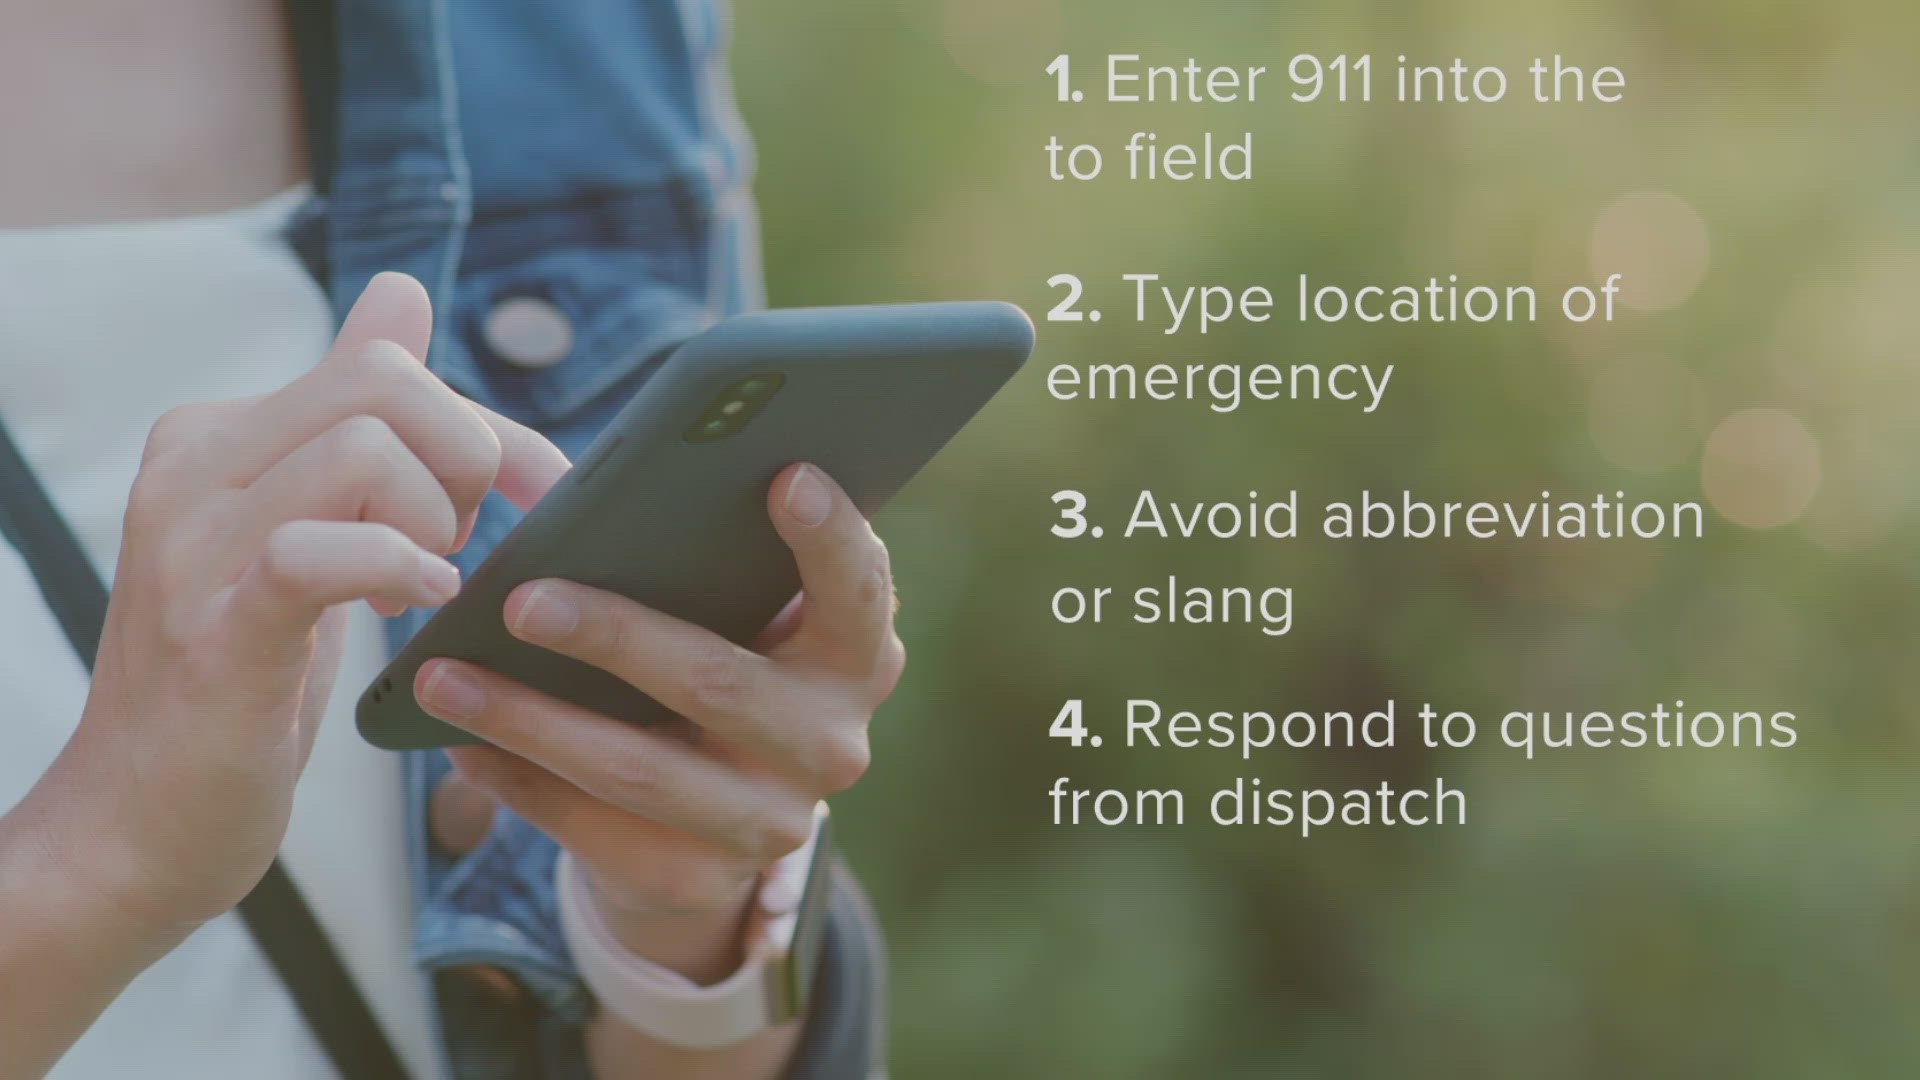 The public will be able to send text messages to 911 dispatchers, enabling them to request help when a phone call isn’t possible, officials said.